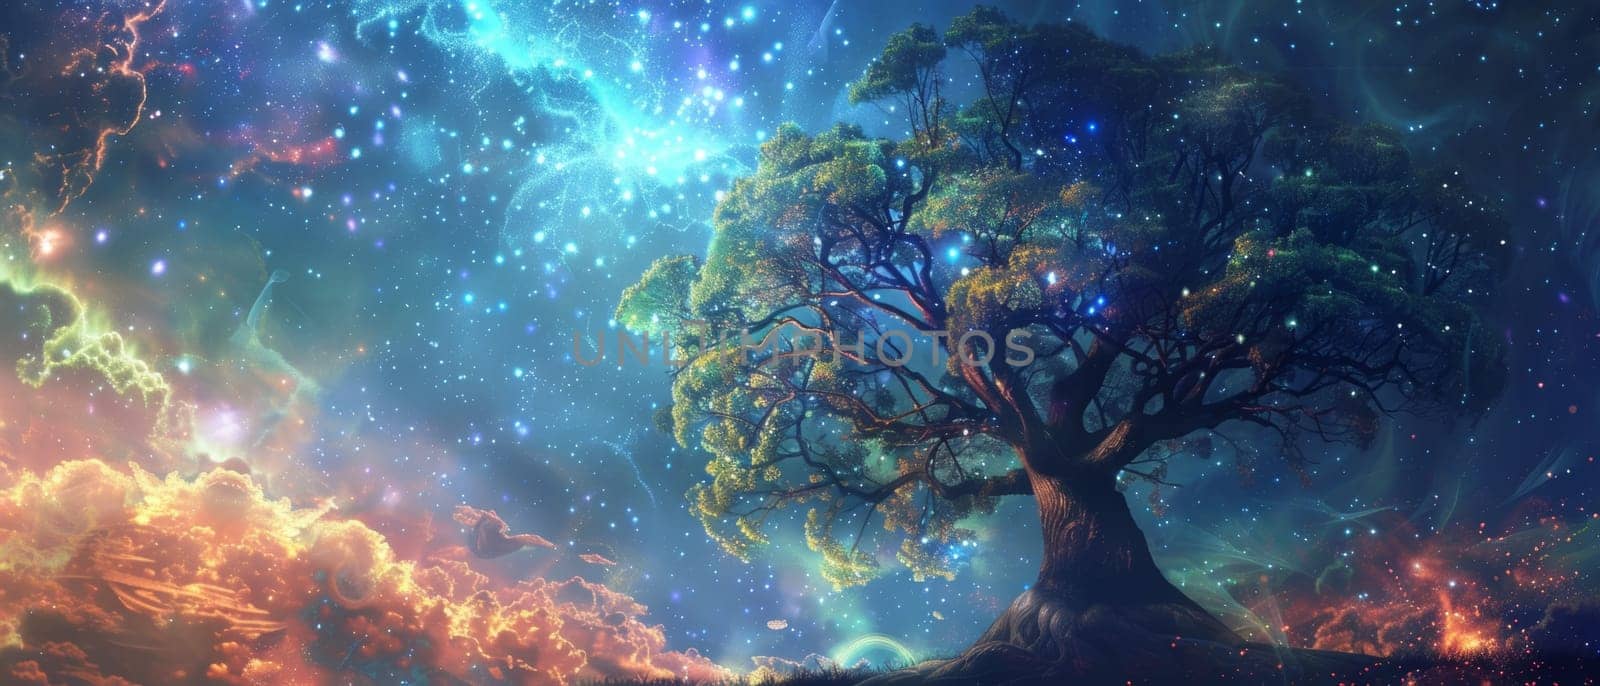 A vivid cosmic scene blending an ancient trees silhouette with the dazzling dance of stars, nebulas, and celestial colors. by sfinks